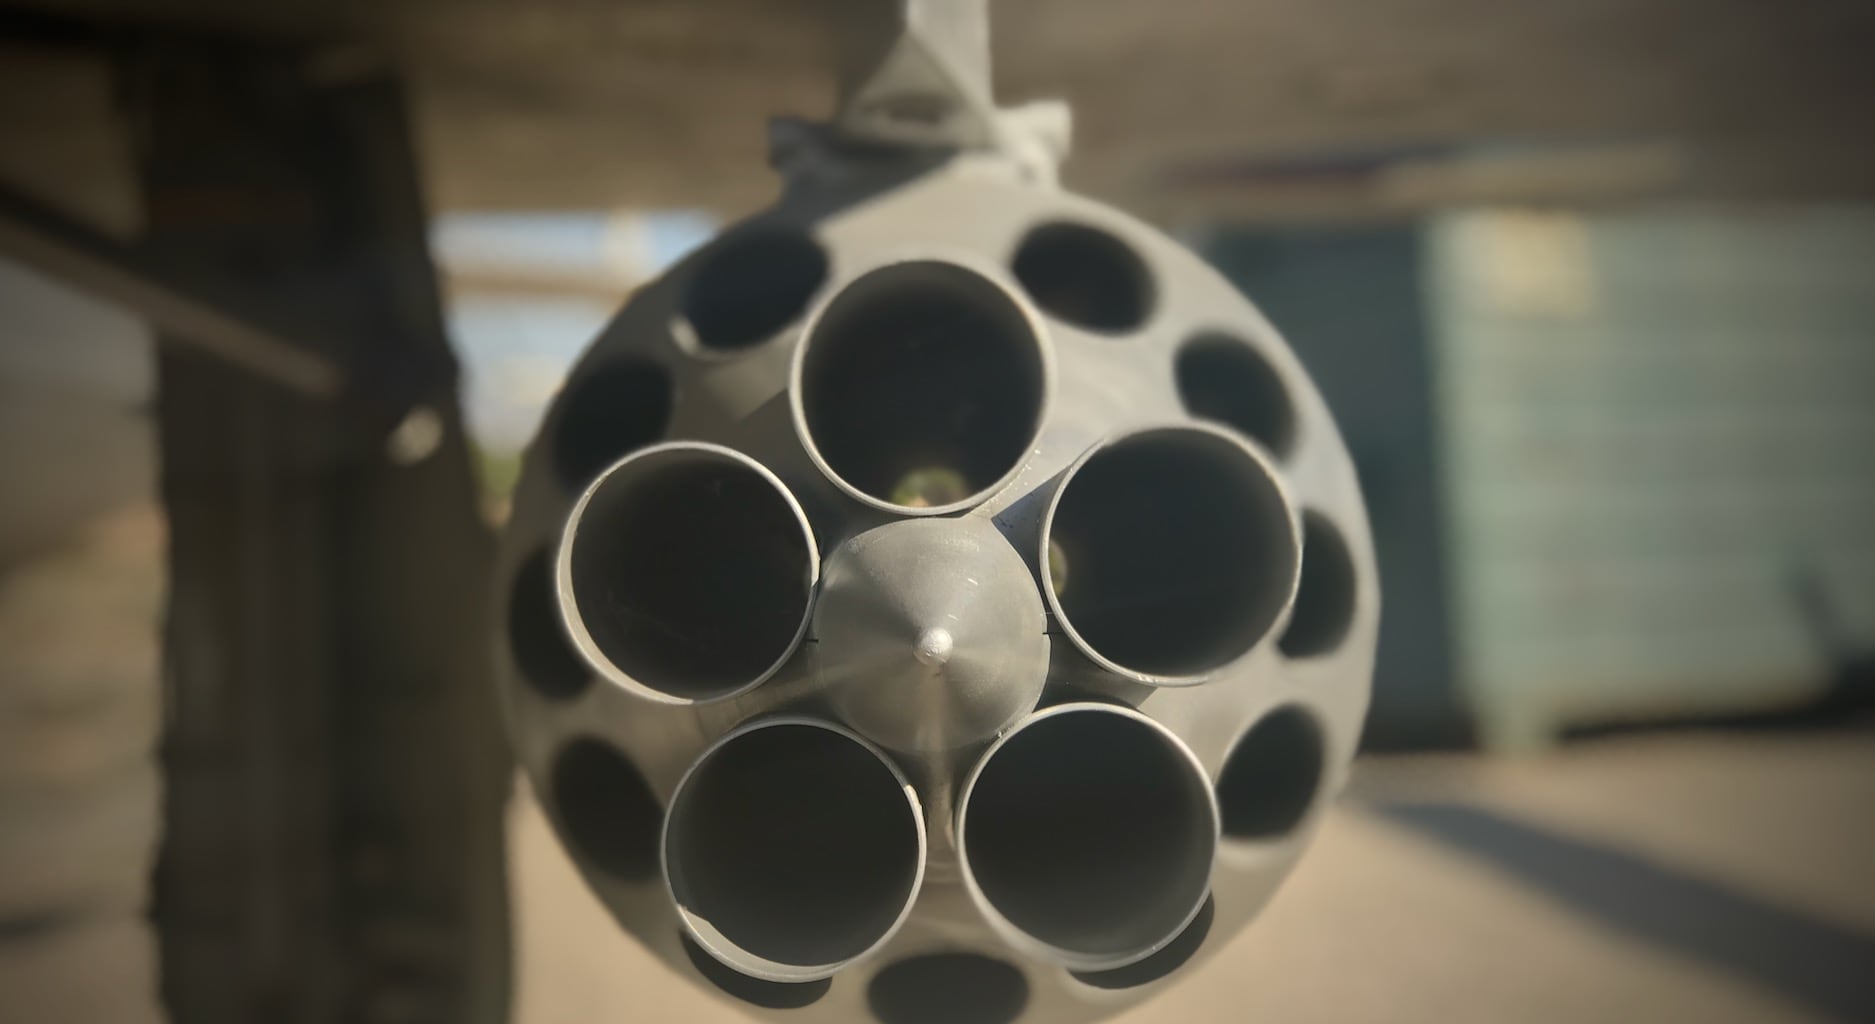 A Russian rocket pod for fighters, looked at head-on, showing 16 empty holes for rockets